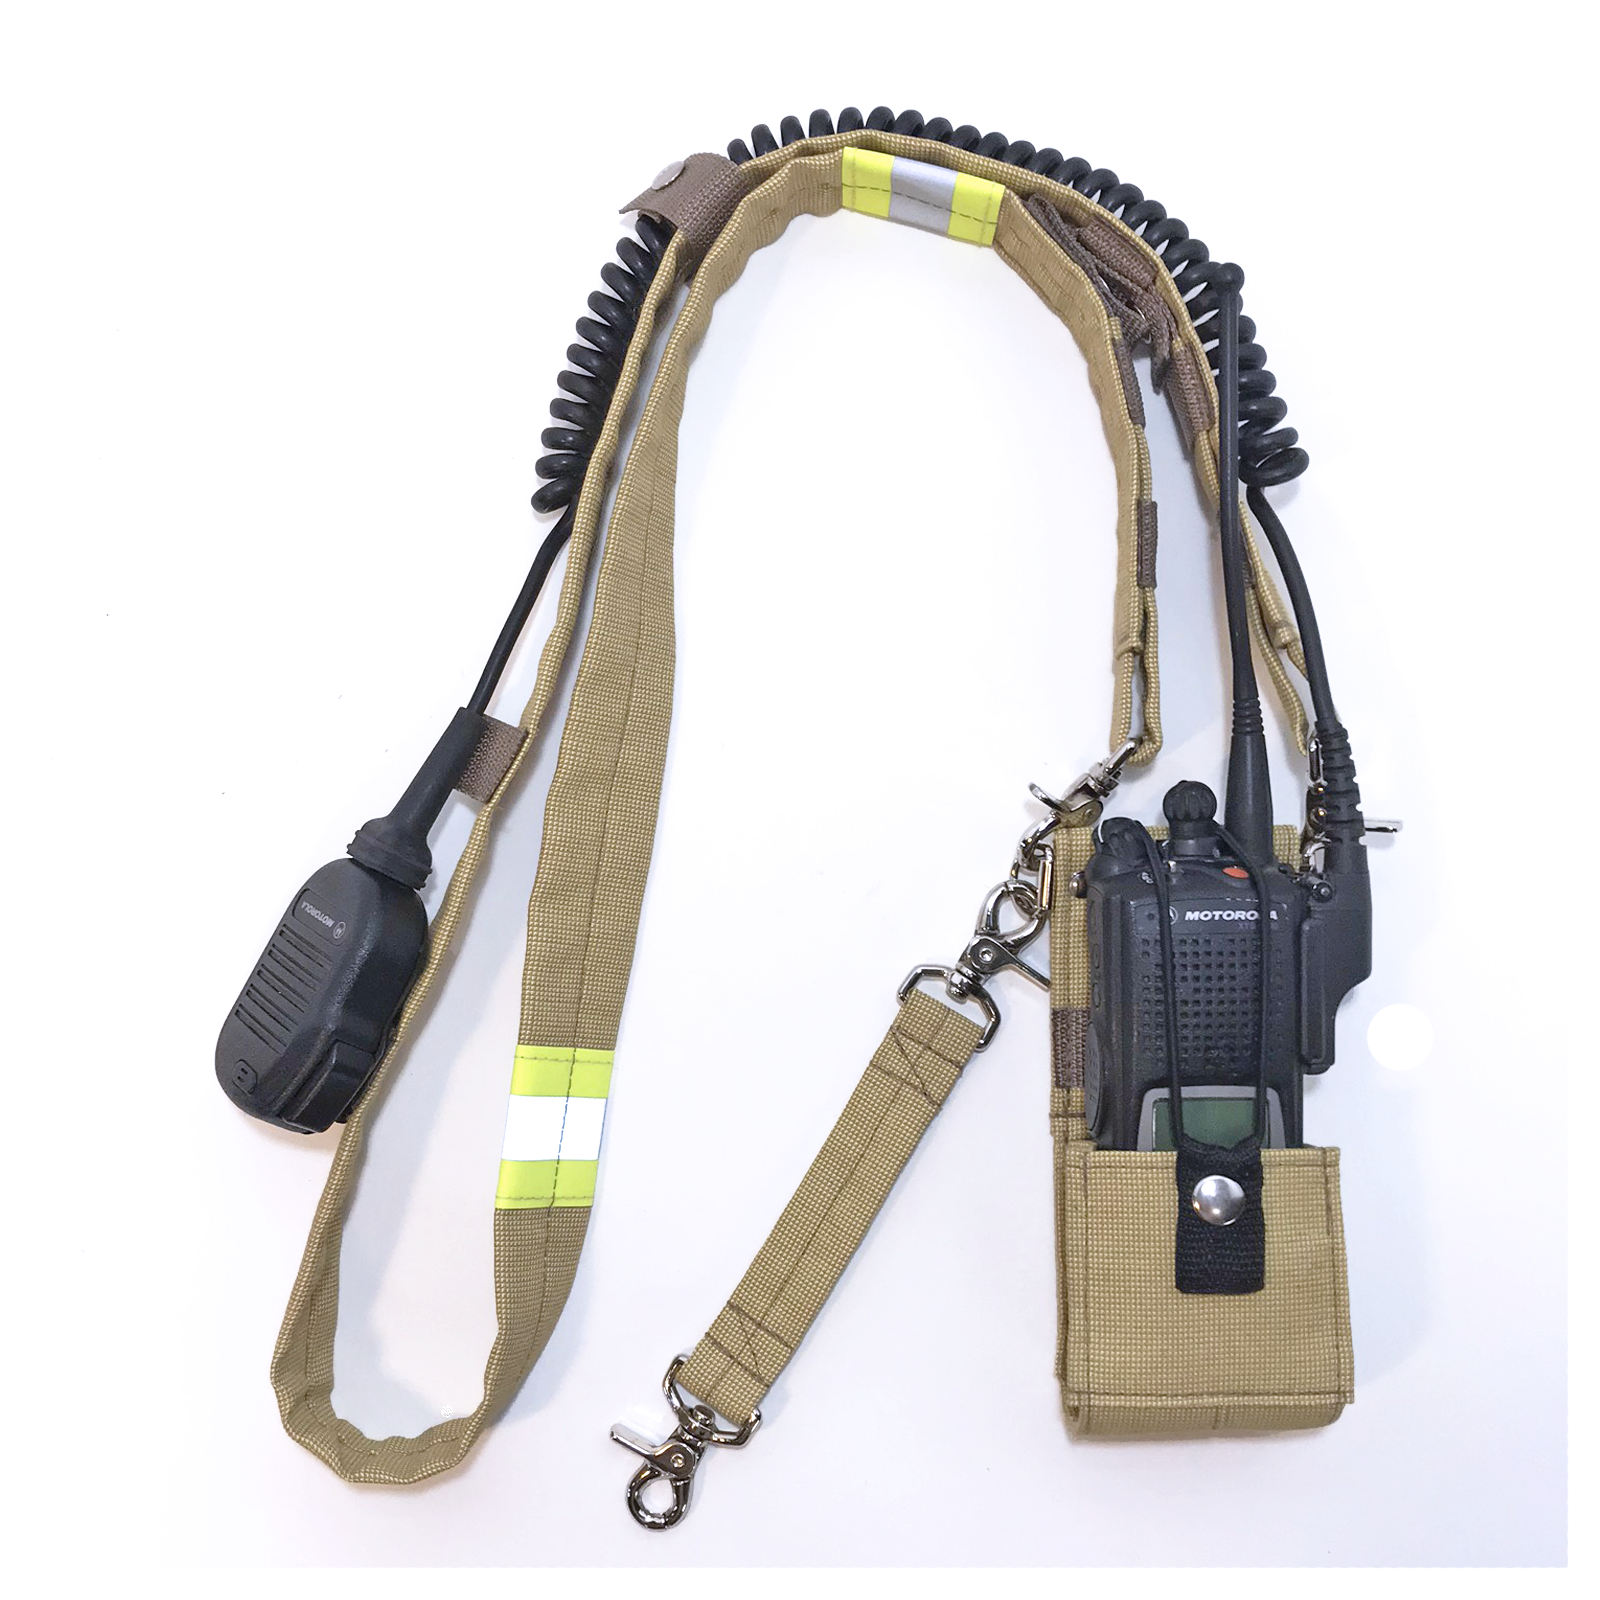 Bunker Gear Radio Strap System in Tan with Yellow Trim